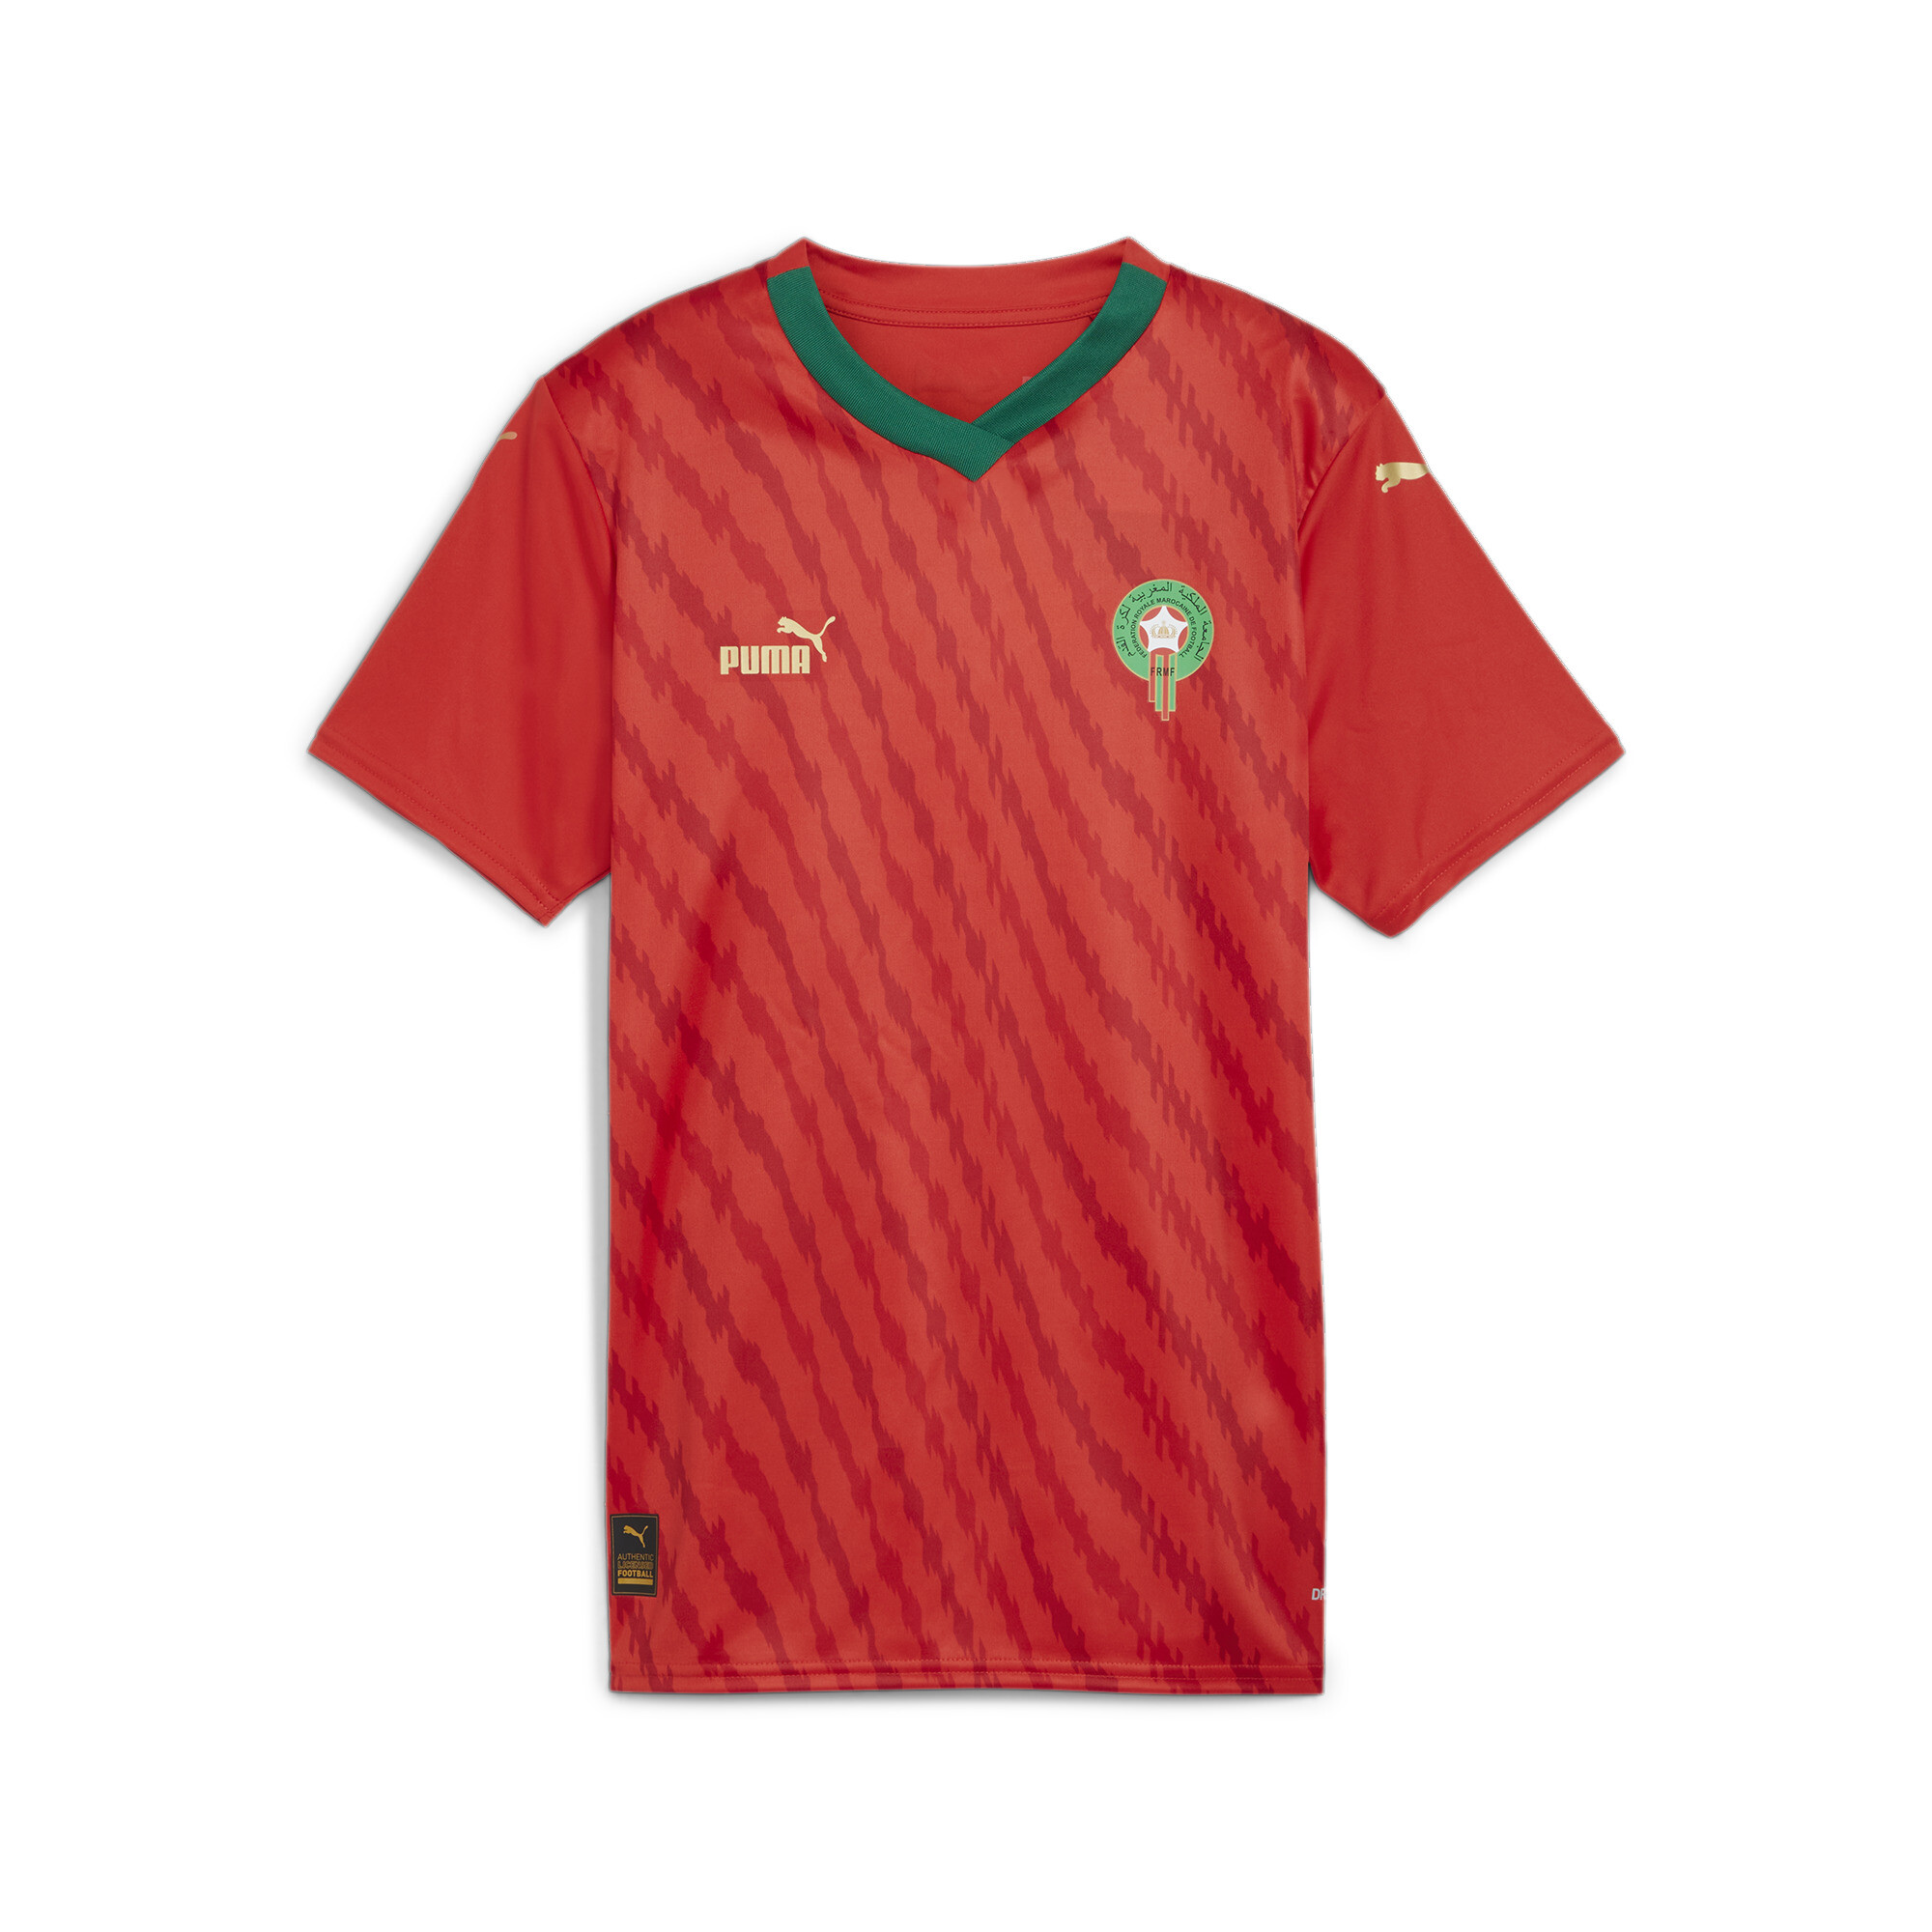 Women's PUMA Morocco 23/24 World Cup Home Jersey In Red, Size Small